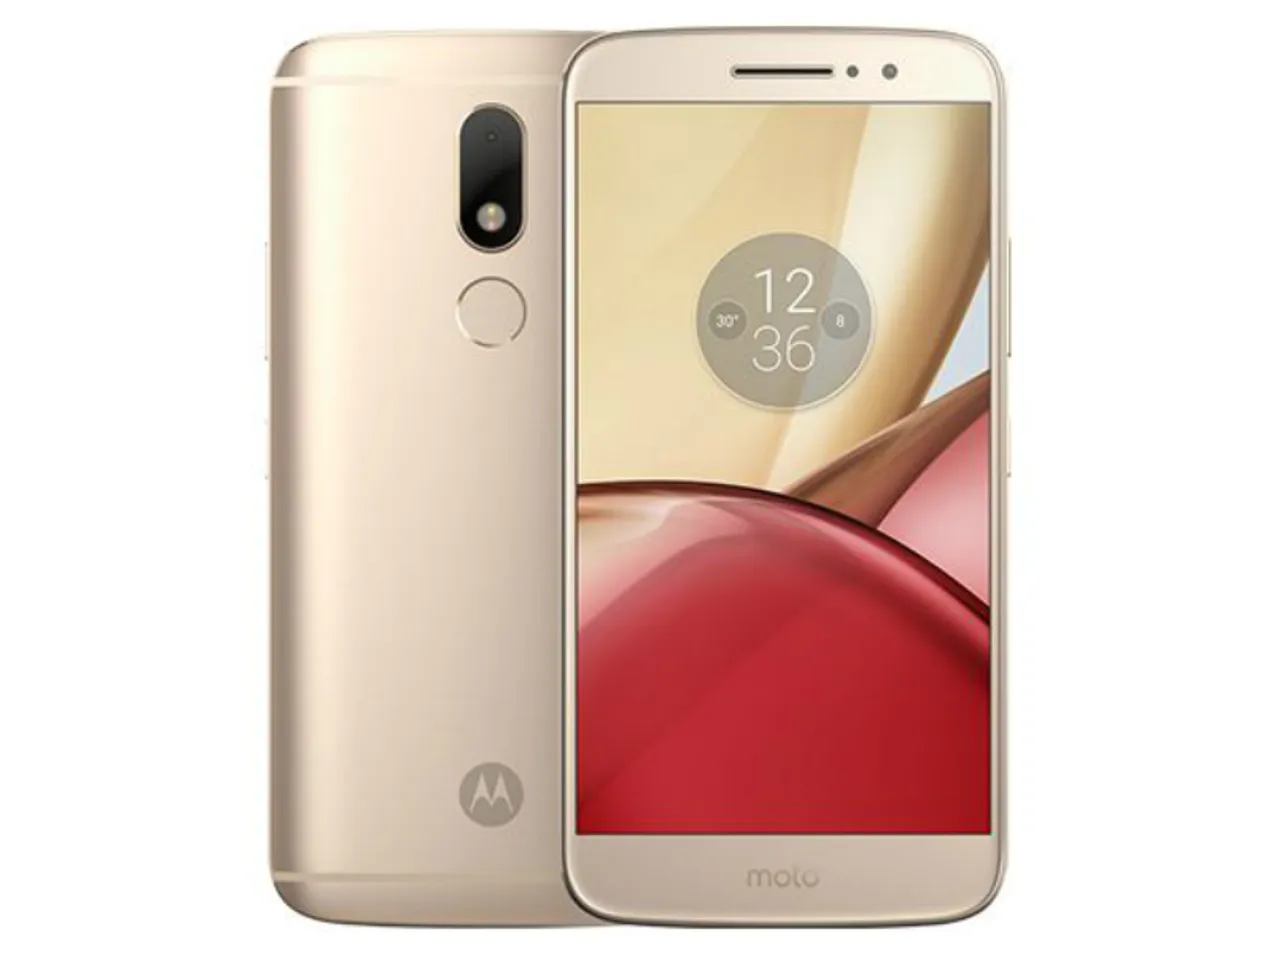 Moto M Boasts Power and Style @ Rs 15,999